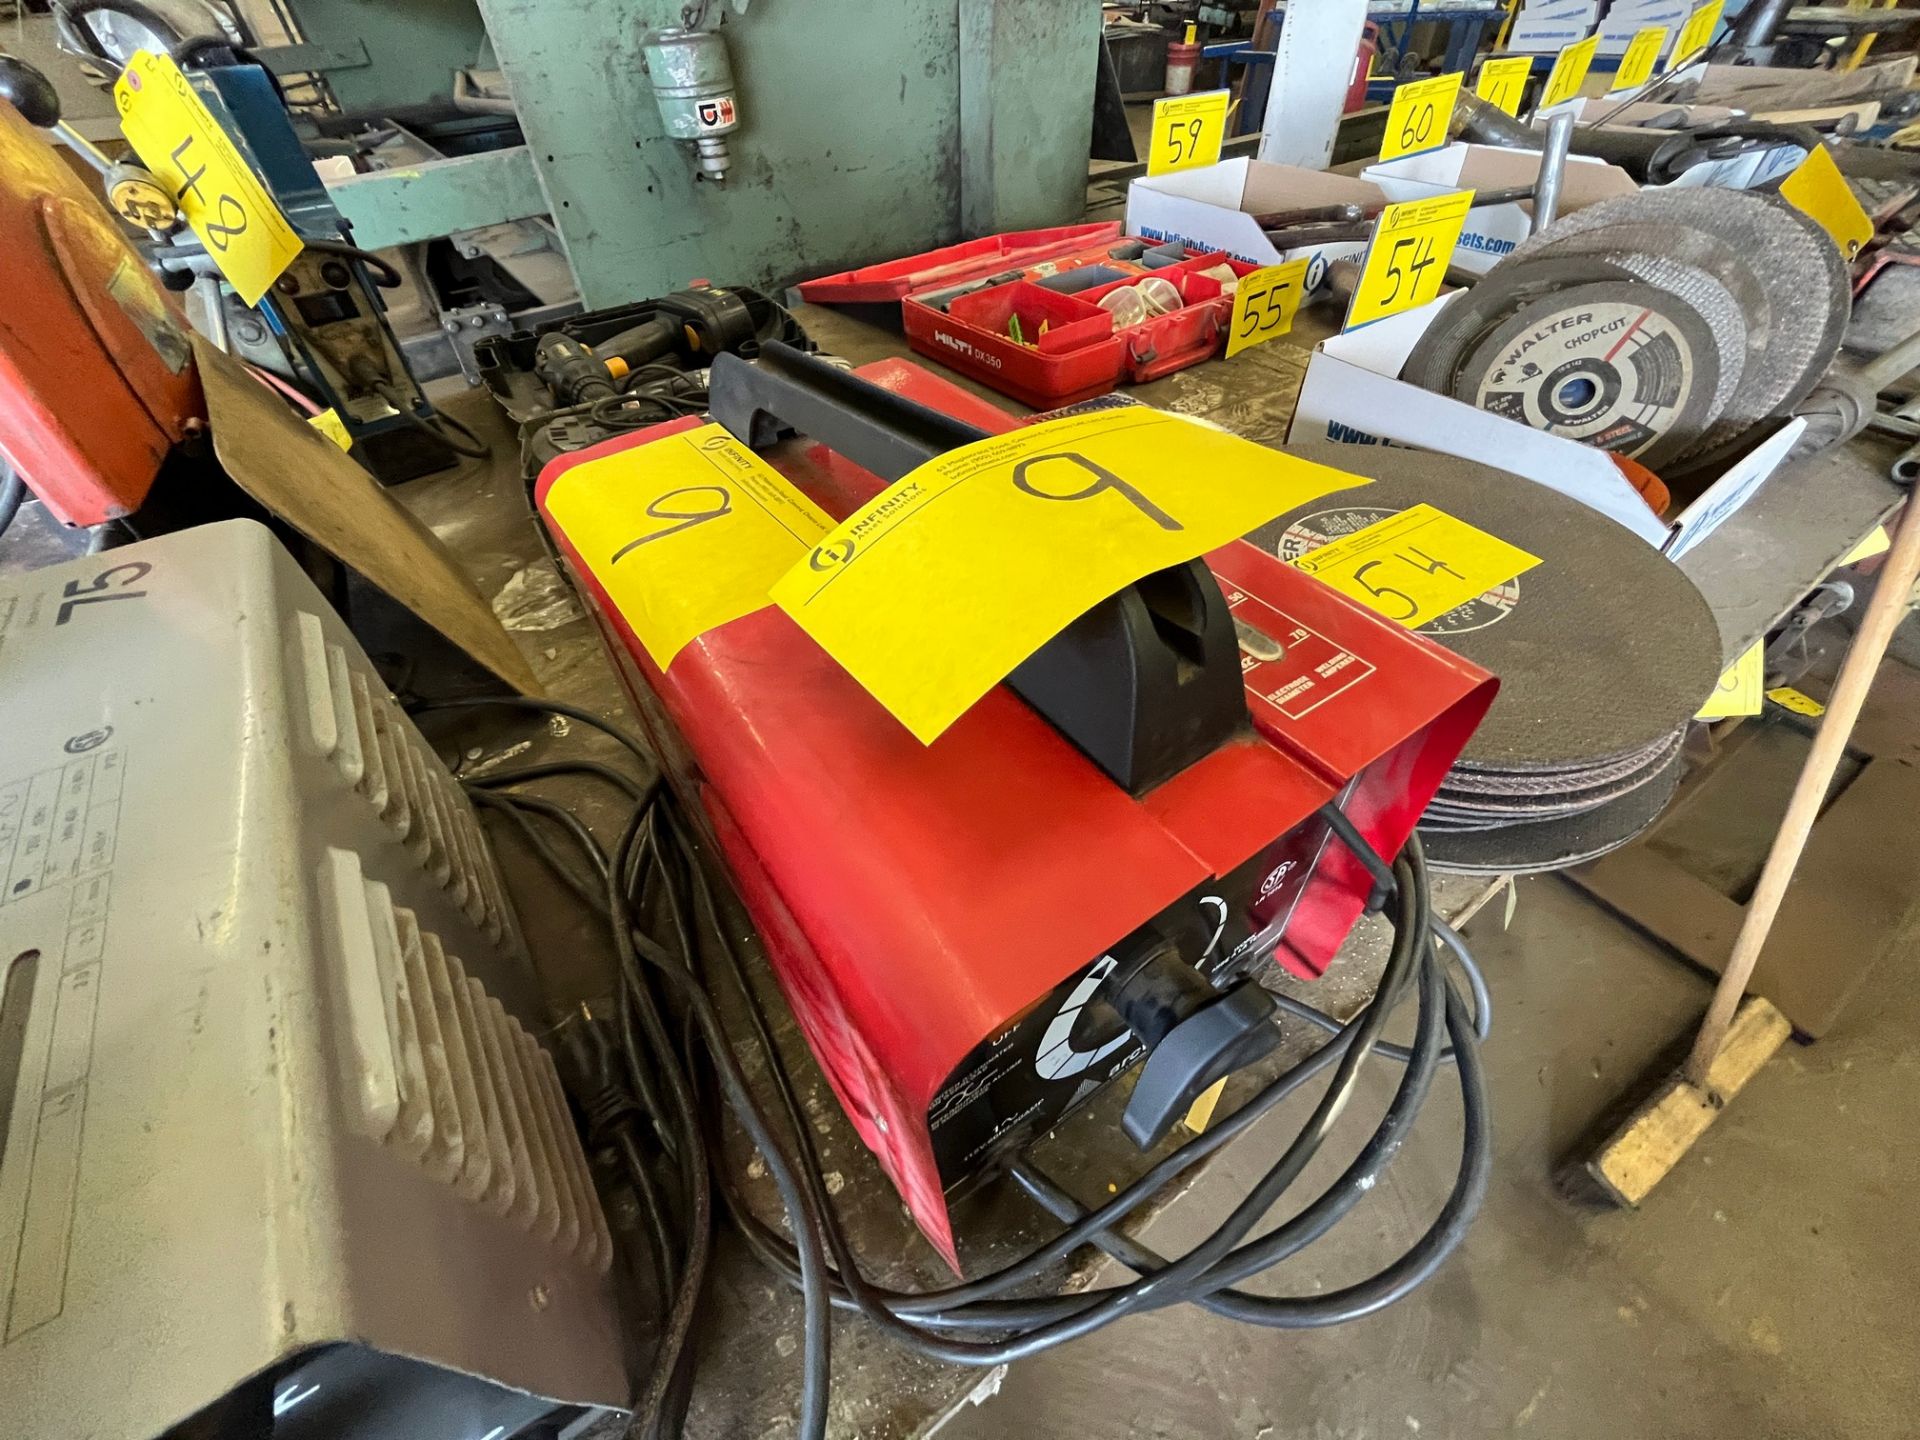 ARCWELD AC-100 WELDER W/ TORCH AND CABLES (NO TANKS) - Image 2 of 3